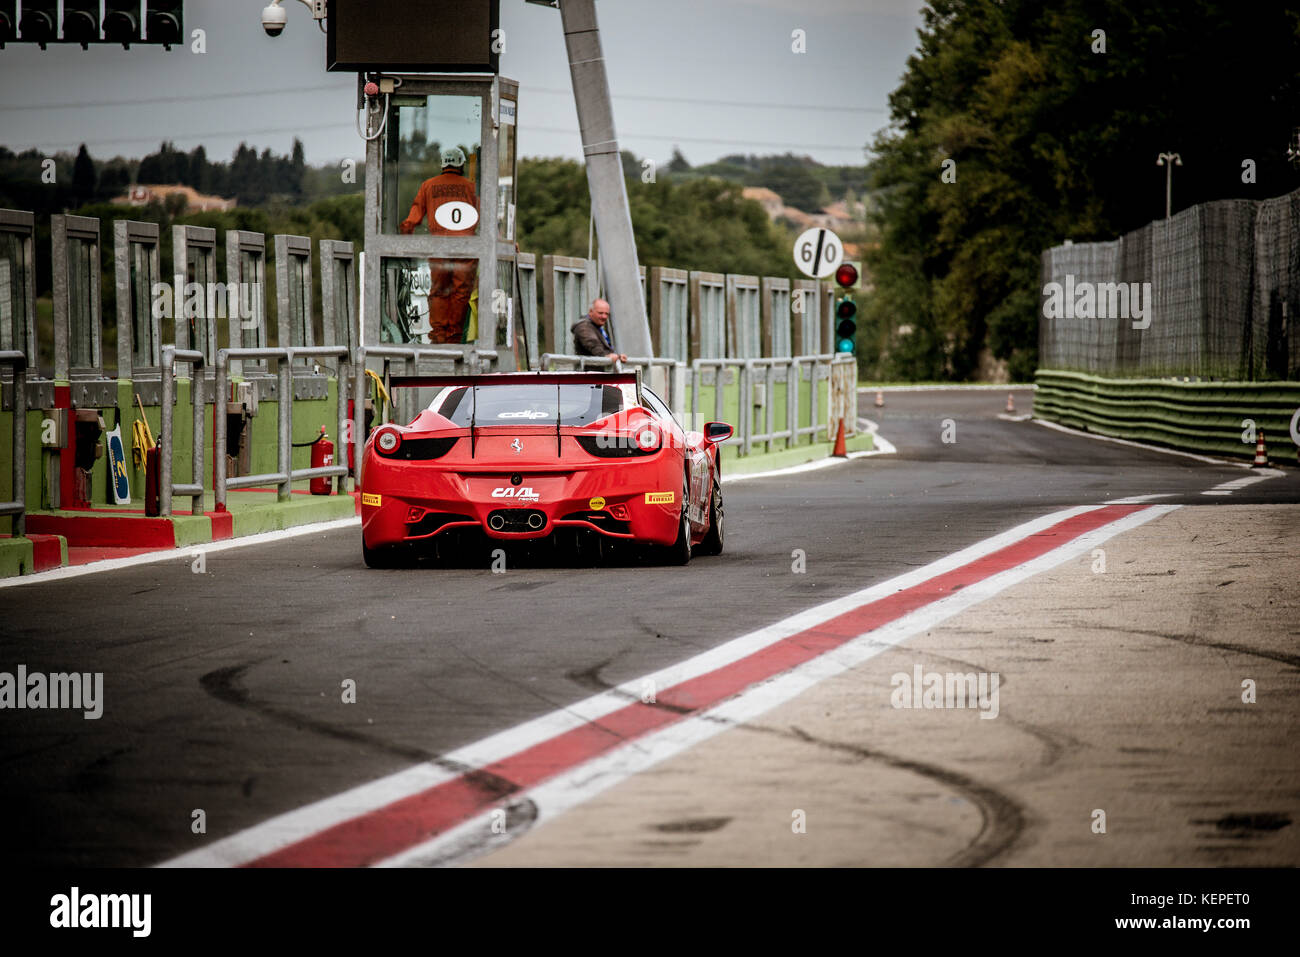 Racing motorsport red Ferrari waiting in pit lane for enter on circuit track rear view Stock Photo